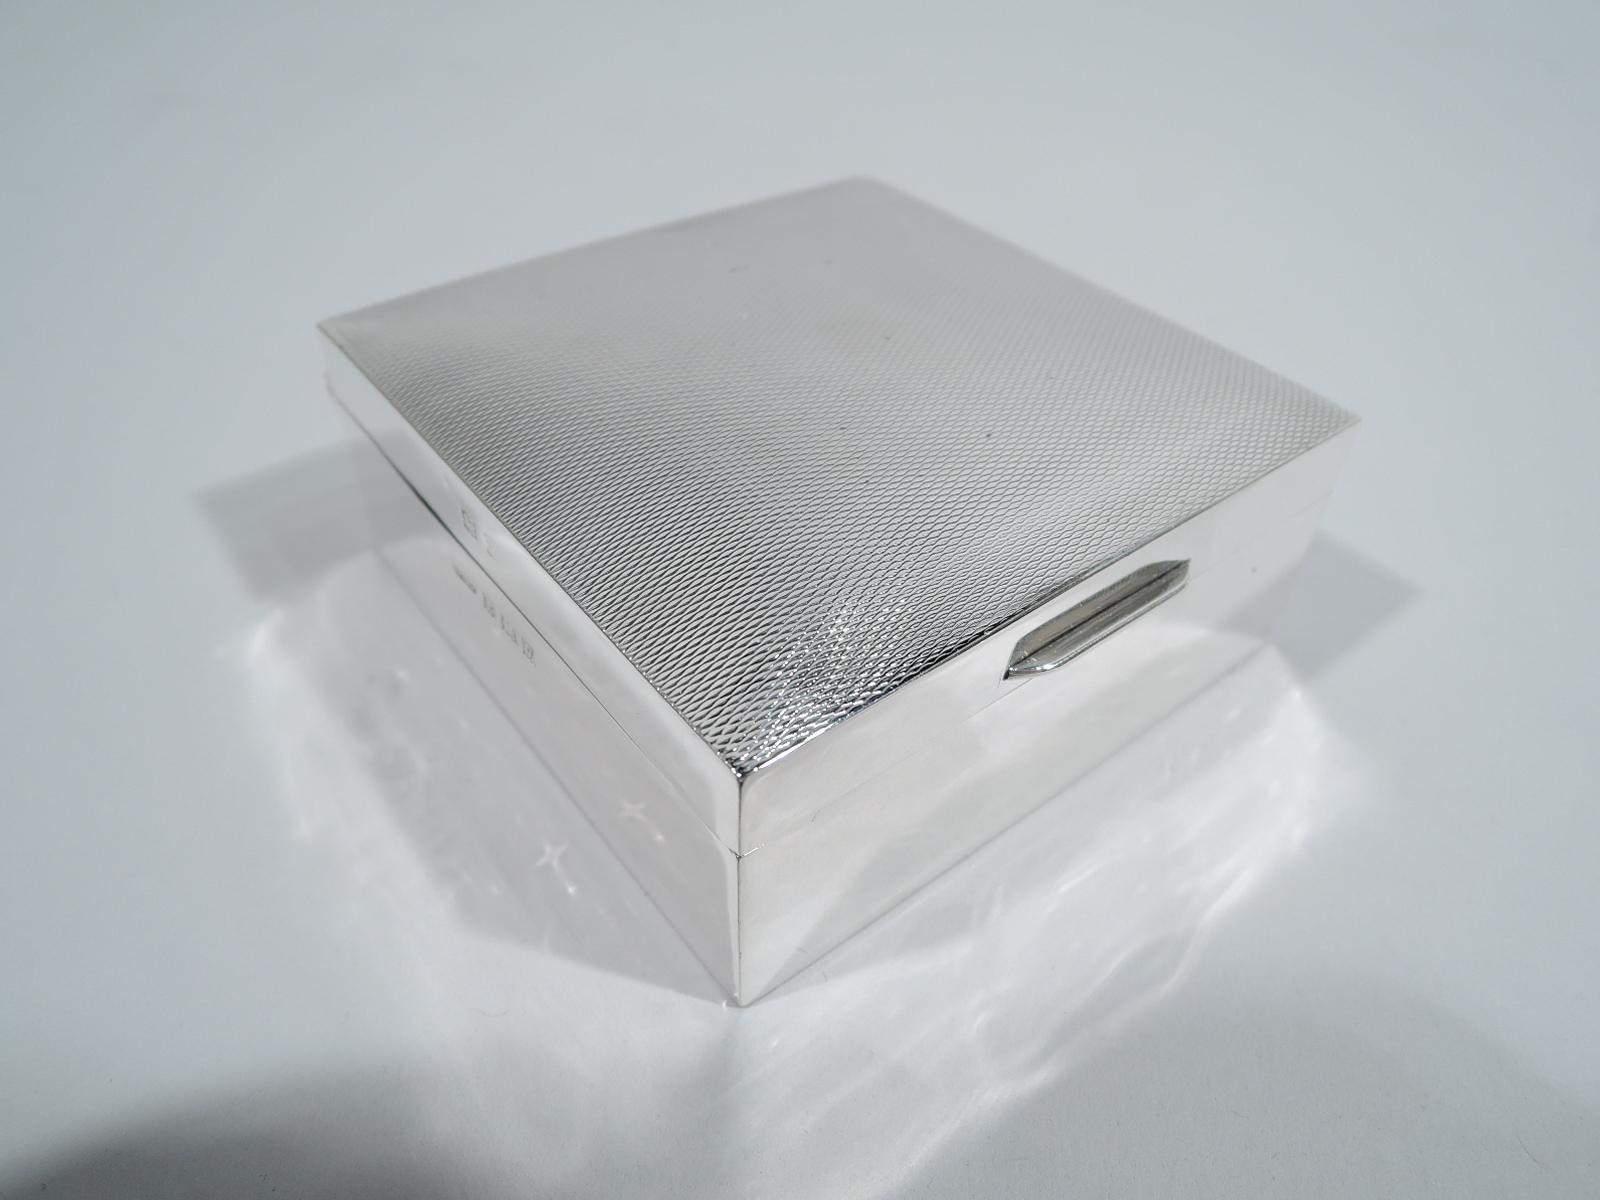 English Art Deco sterling silver trinket box, 1956. Square with plain and straight sides. Cover hinged and gently curved with tab and allover engine-turned wave ornament. Box and cover interior cedar lined. Underside inset with laminate. Fully